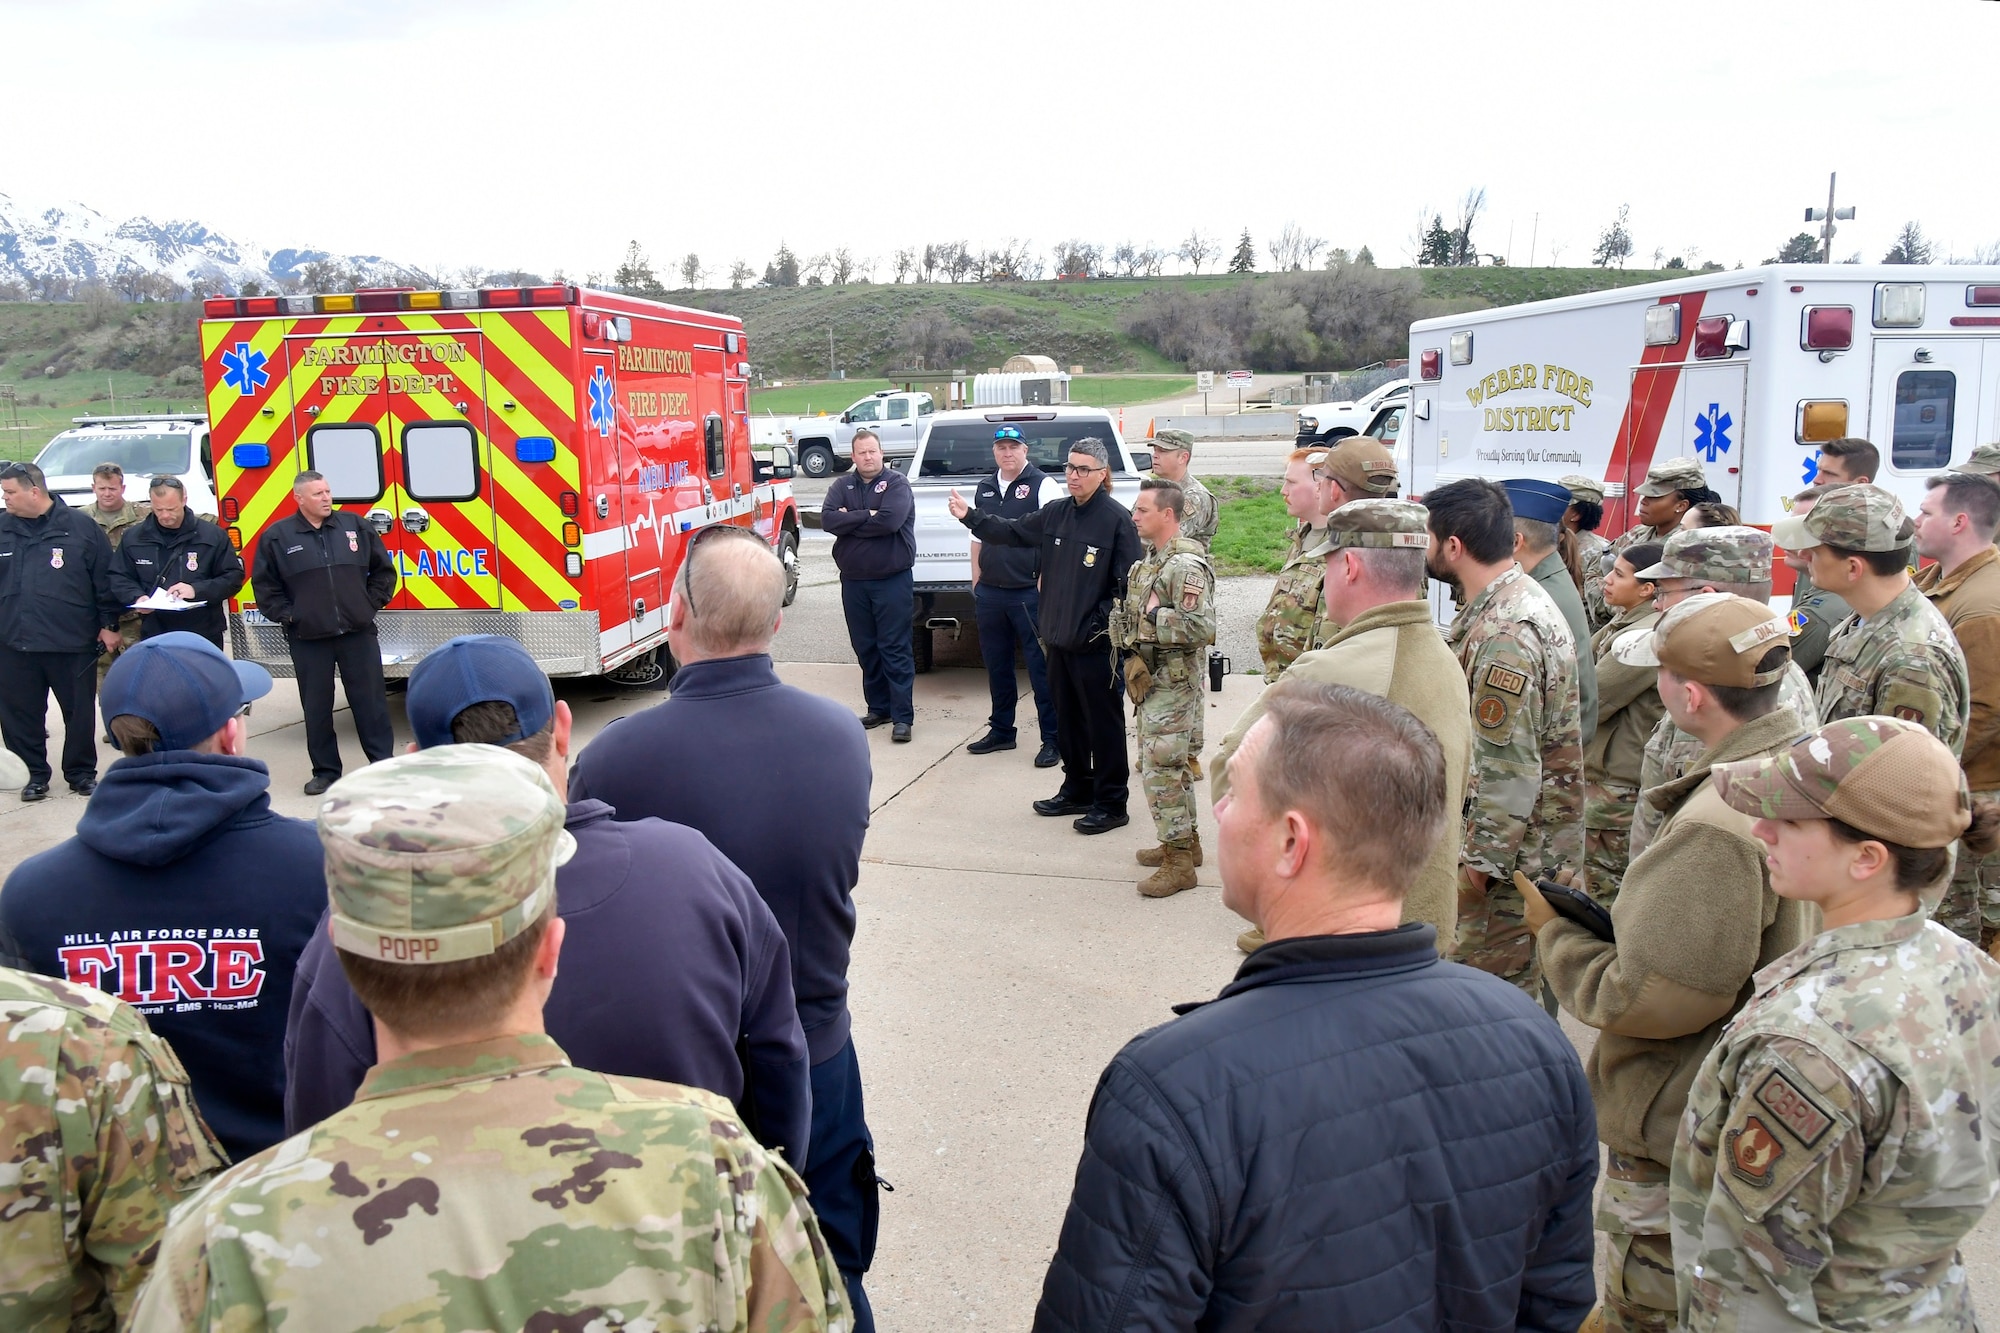 Members of various Hill Air Force Base units teamed with community responders April 17 for a joint mass casualty exercise. The exercise simulated a performing aircraft crashing into a group onlookers, causing the demand of patients to exceed resources and capabilities. The aim of the exercise was to maximize training for responders, test and evaluate emergency functions and response, and enhance readiness, integration, and response skills.